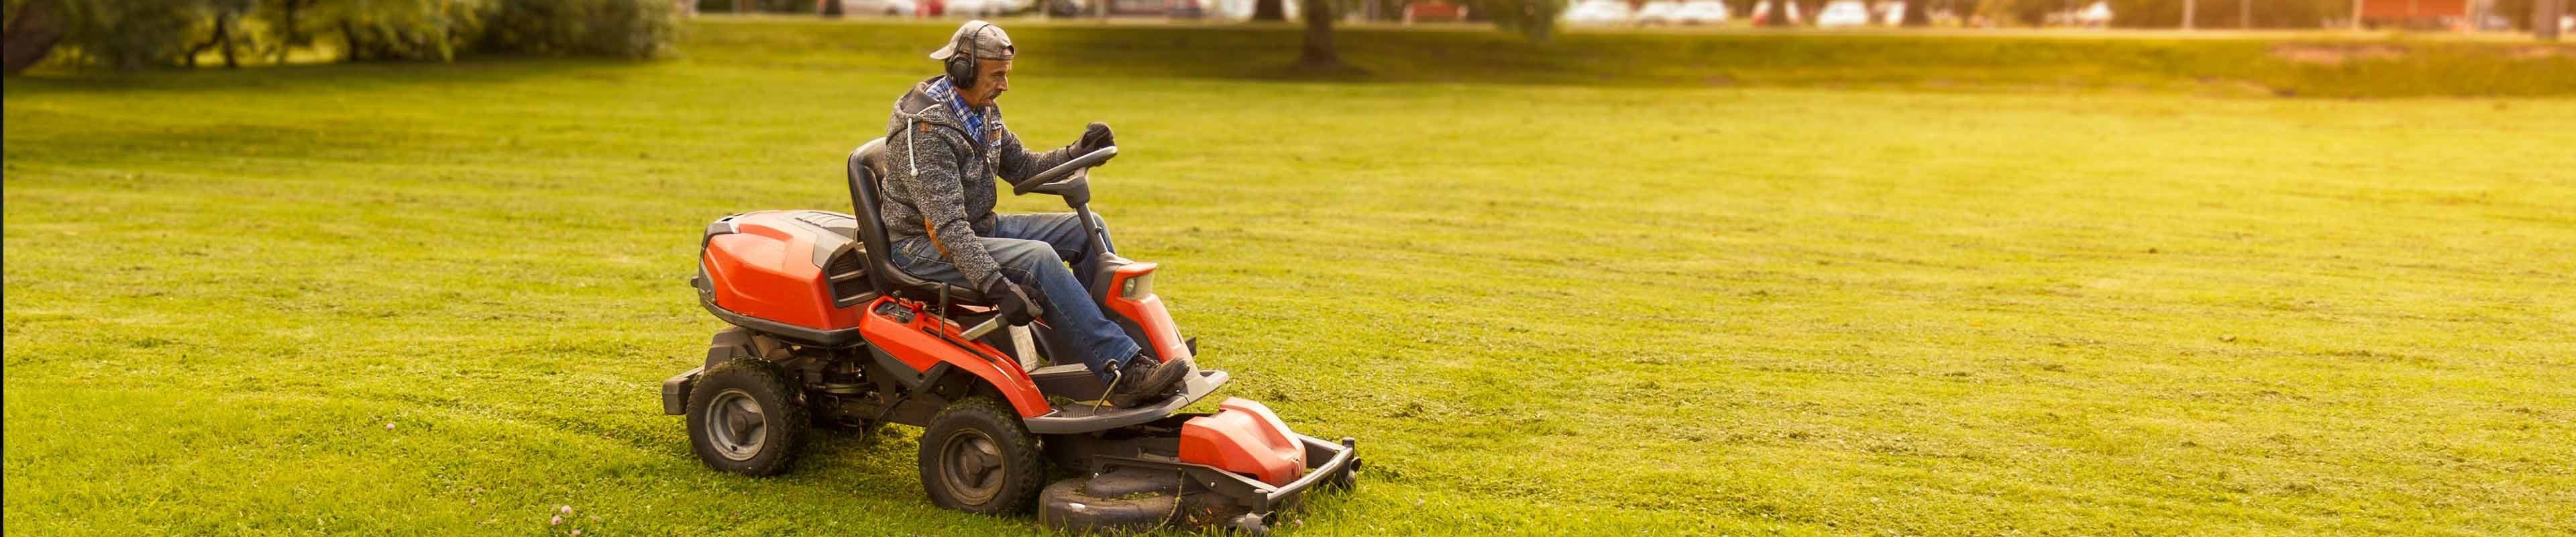 American Family Insurance | Image of a man in protective gear riding a lawn mower.